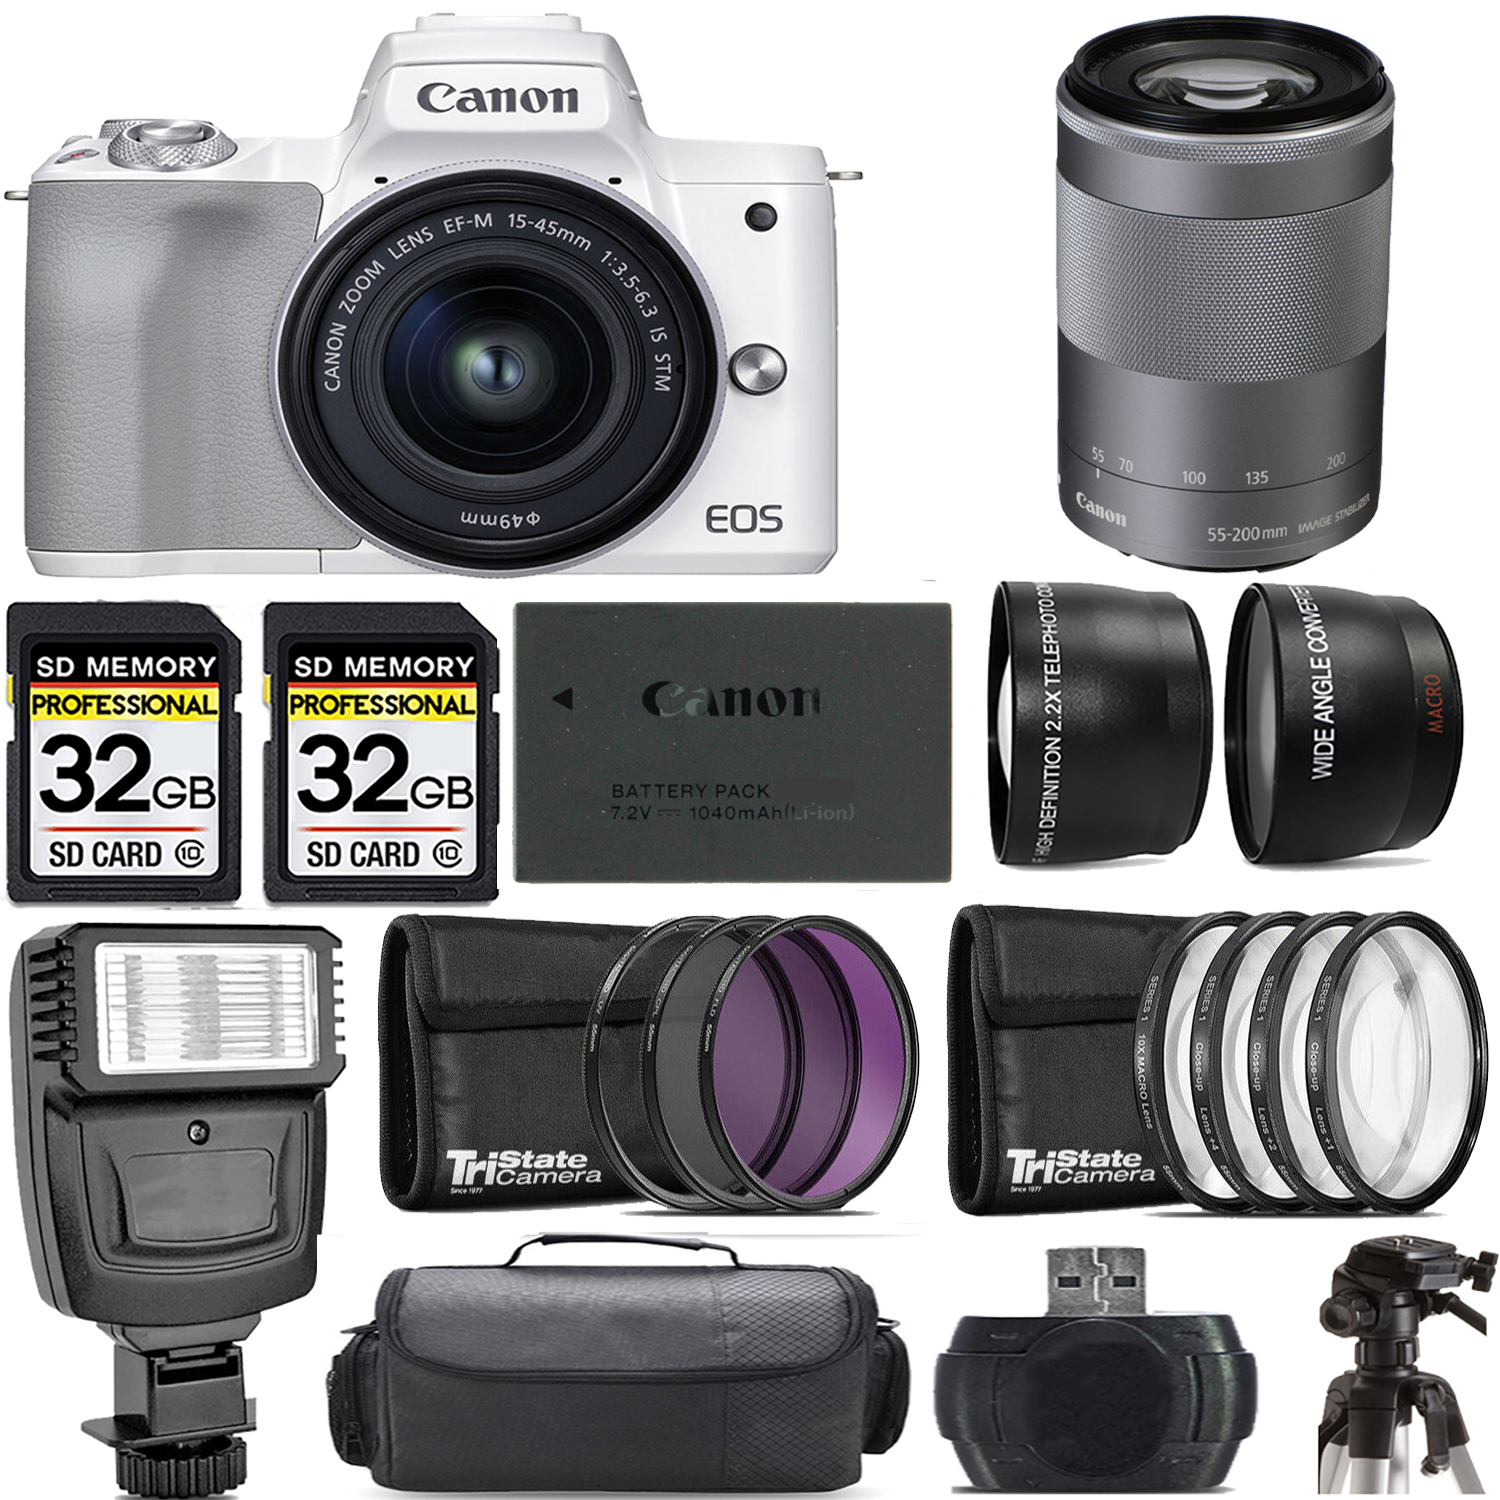 M50 II + 15-45mm Lens (White) + 55-200mm IS Lens (Silver) + Flash - Kit *FREE SHIPPING*